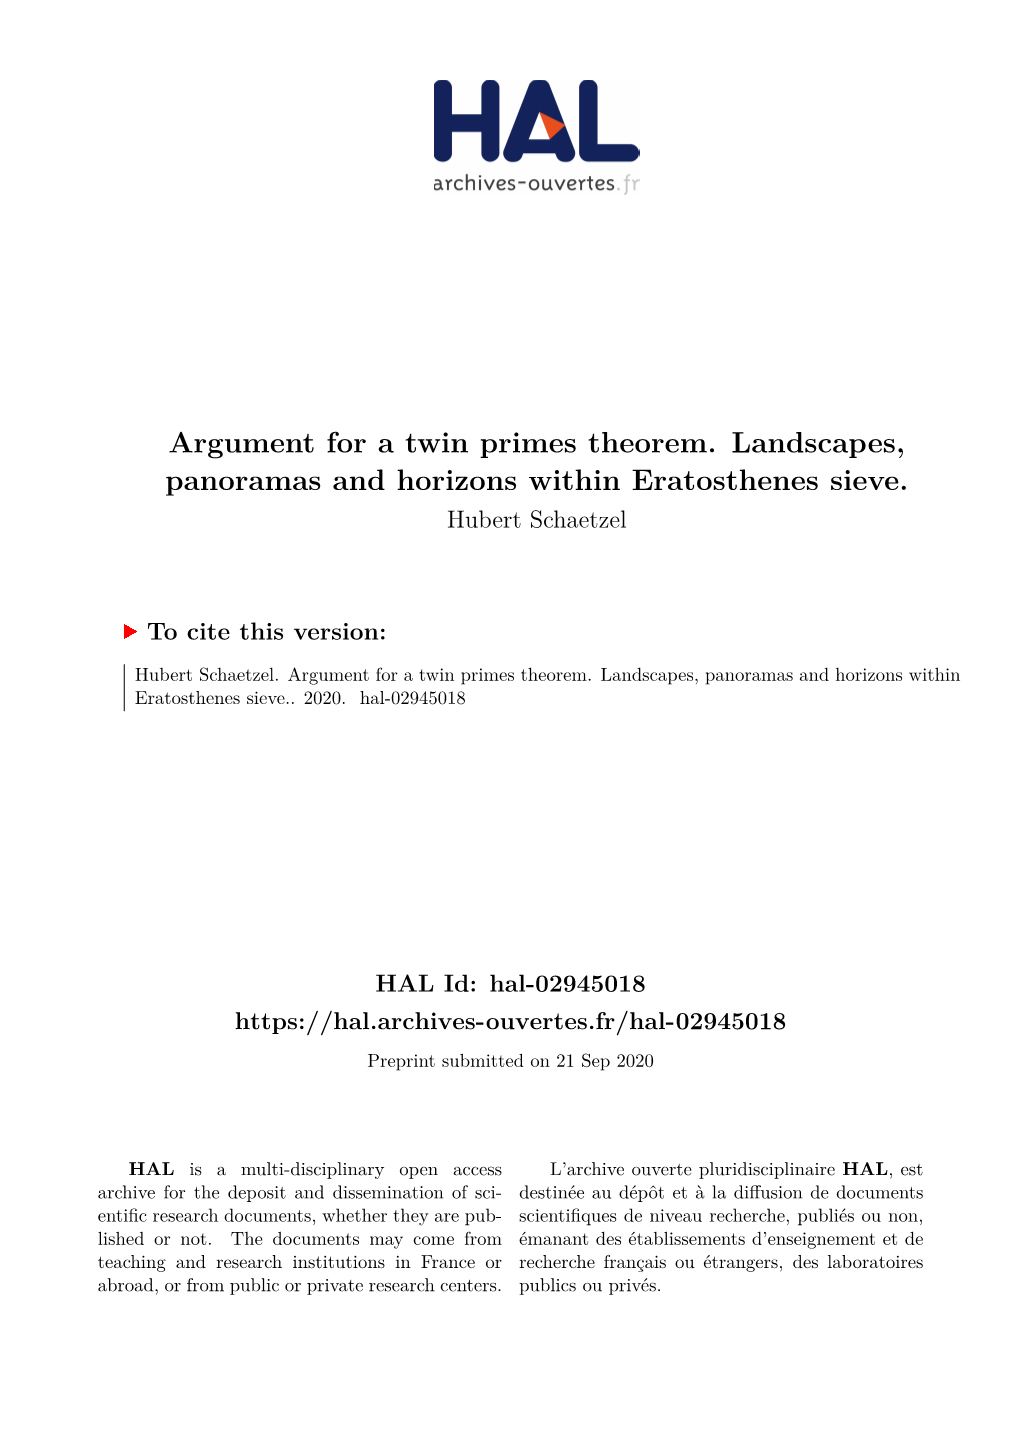 Argument for a Twin Primes Theorem. Landscapes, Panoramas and Horizons Within Eratosthenes Sieve